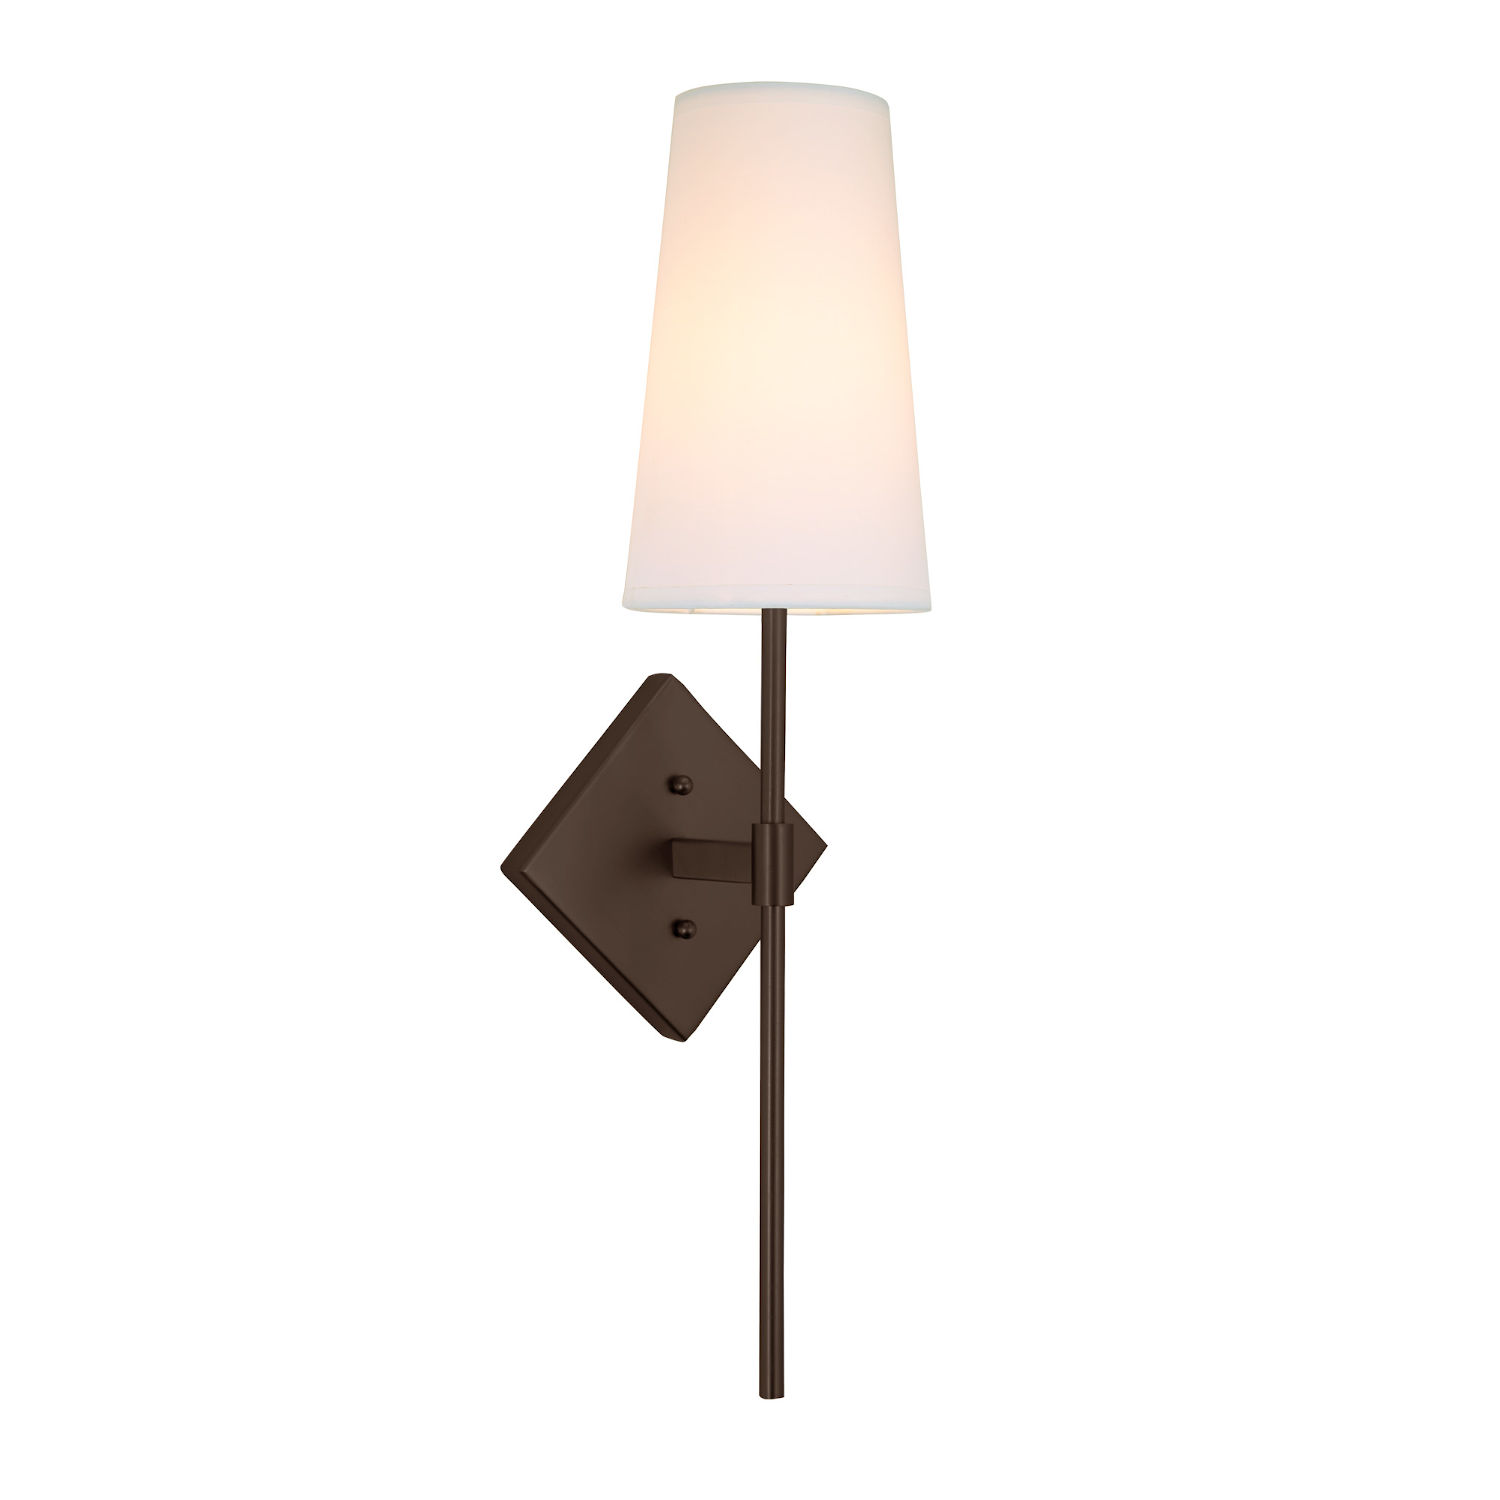 Astor Oil Rubbed Bronze One-Light Wall Sconce